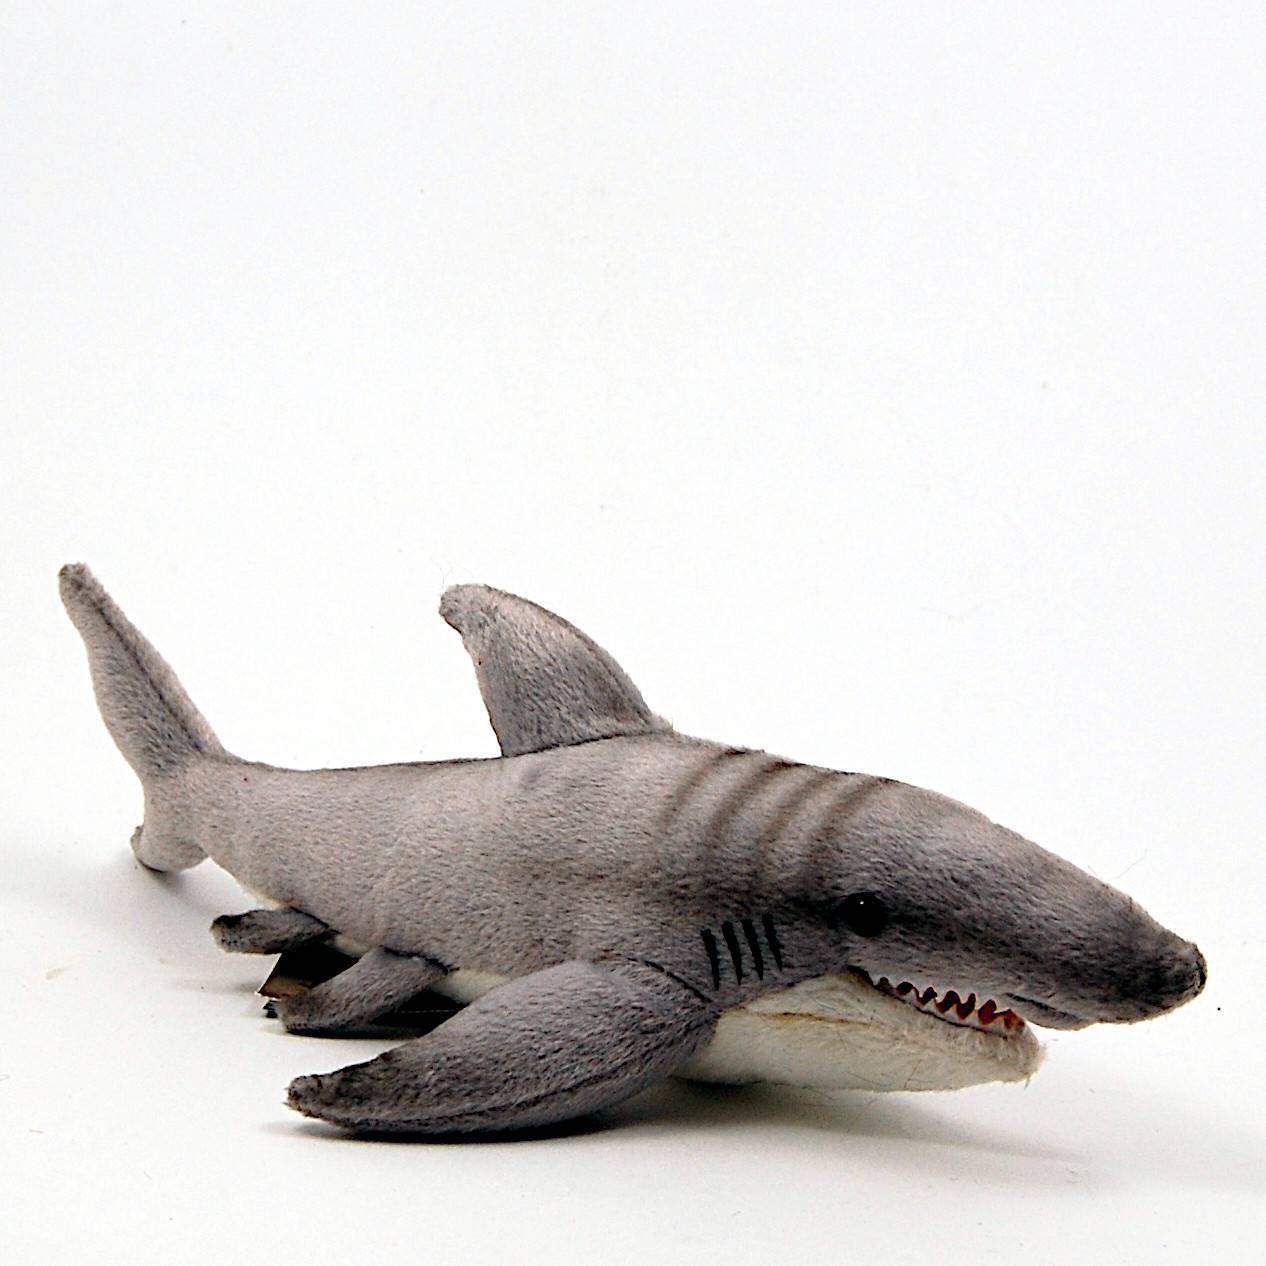 This Tiger Shark 13.5" by Hansa True to Life Look Soft Plush Animal Learning Toys is made with love by Premier Homegoods! Shop more unique gift ideas today with Spots Initiatives, the best way to support creators.